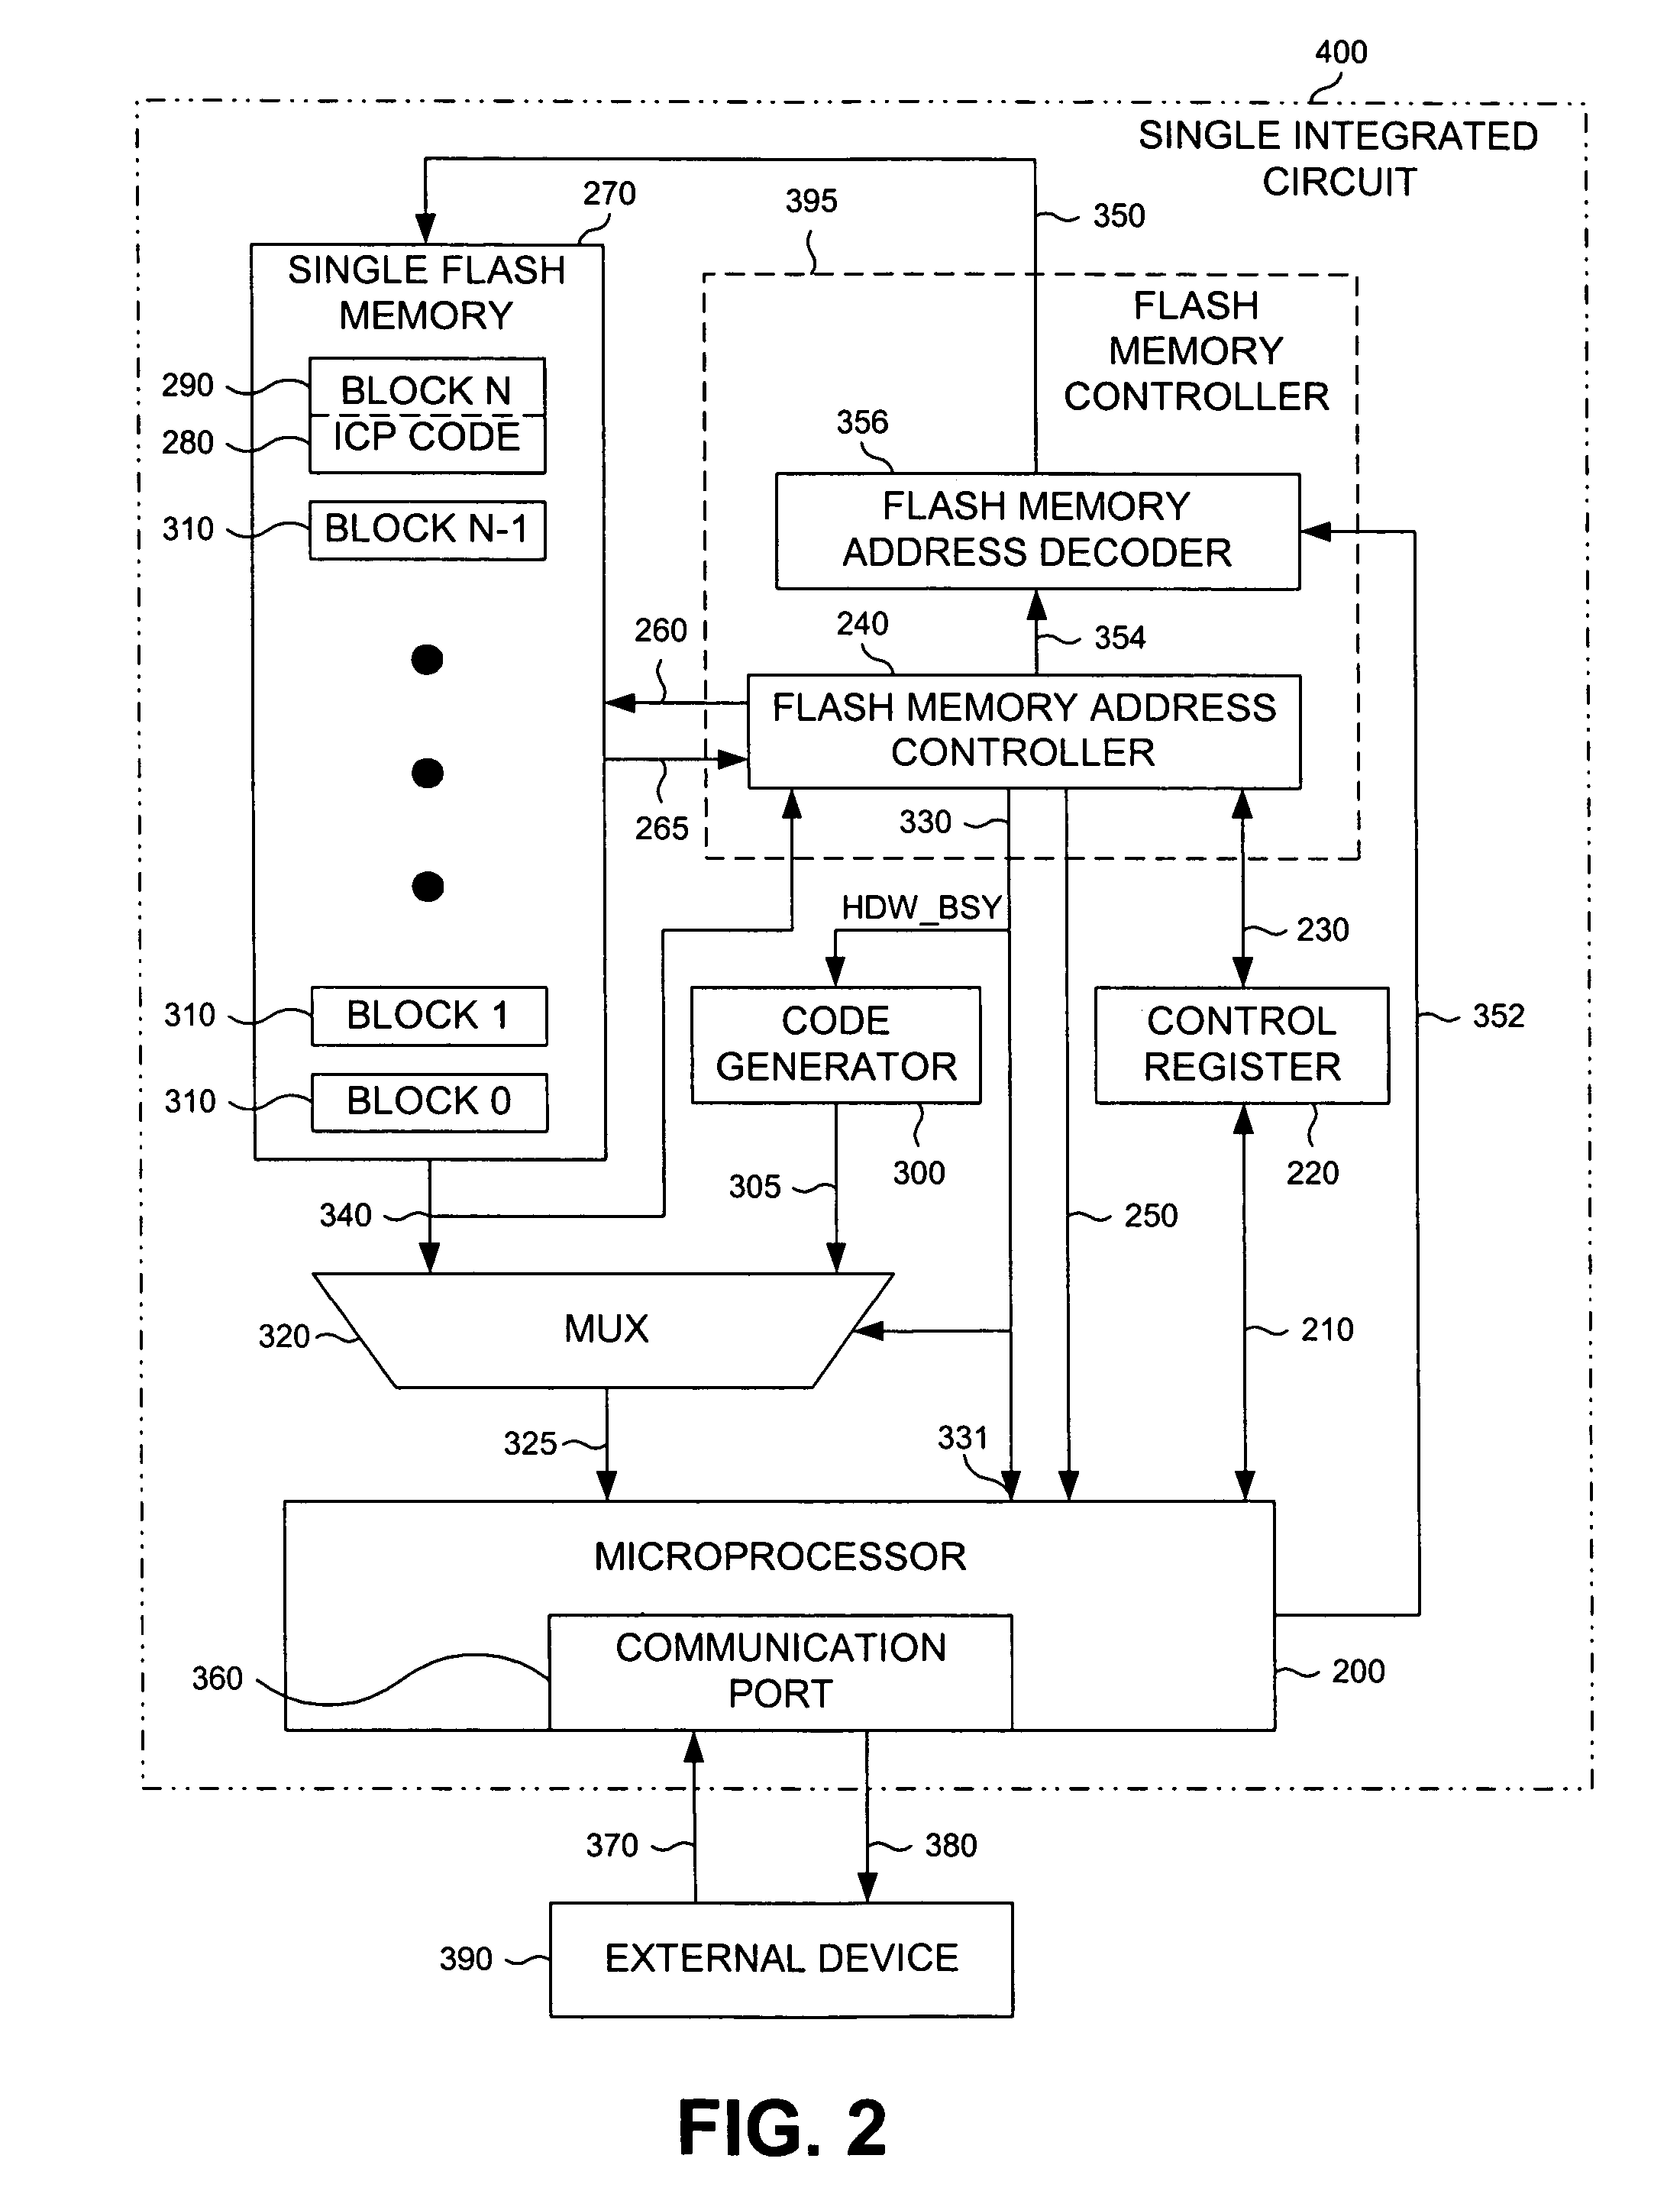 In-circuit programming architecture with processor, delegable flash controller, and code generator